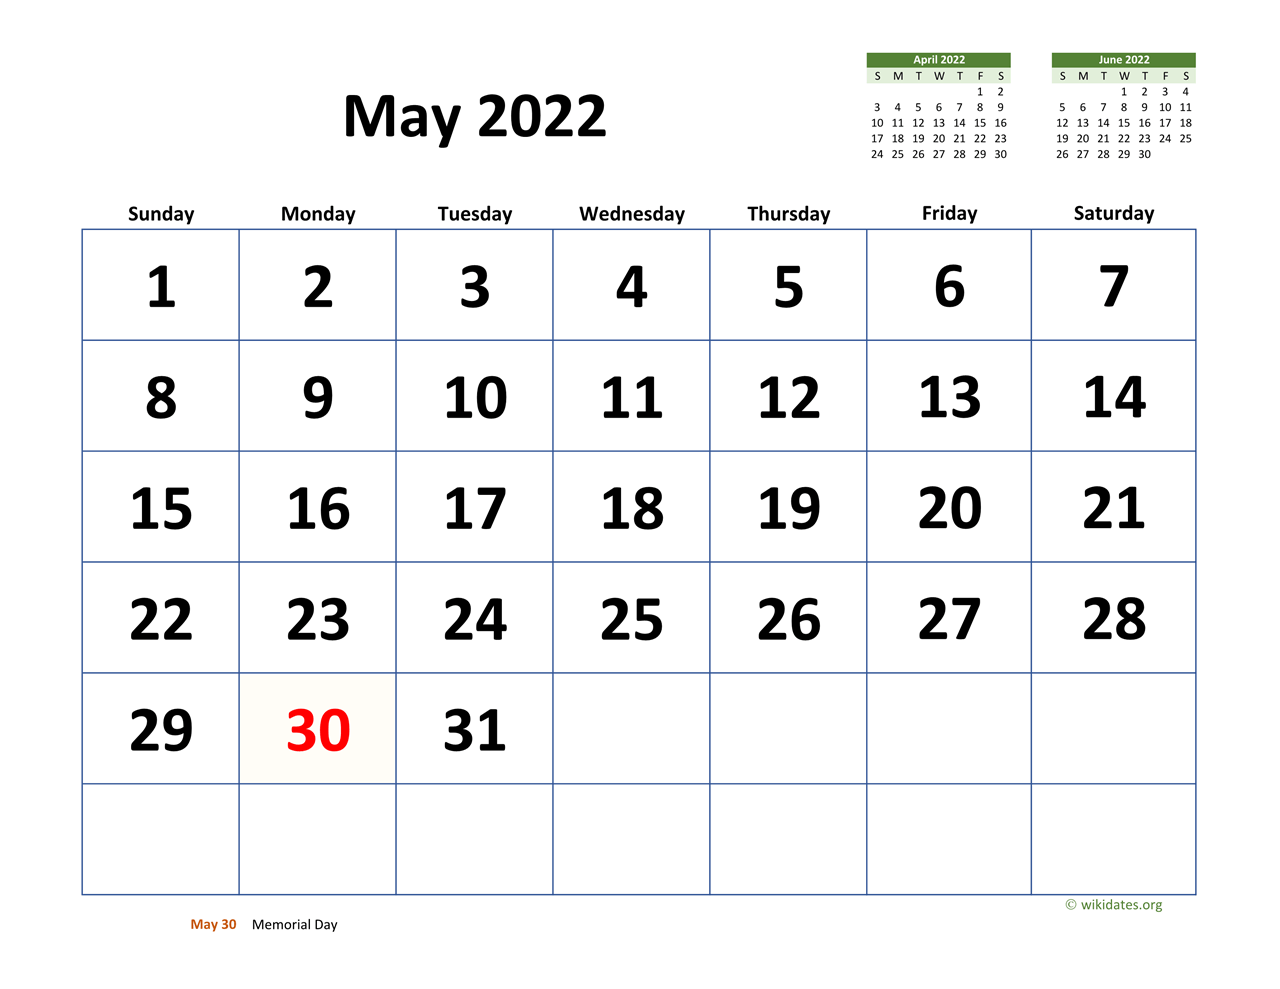 May 2022 Calendar Images May 2022 Calendar With Extra-Large Dates | Wikidates.org